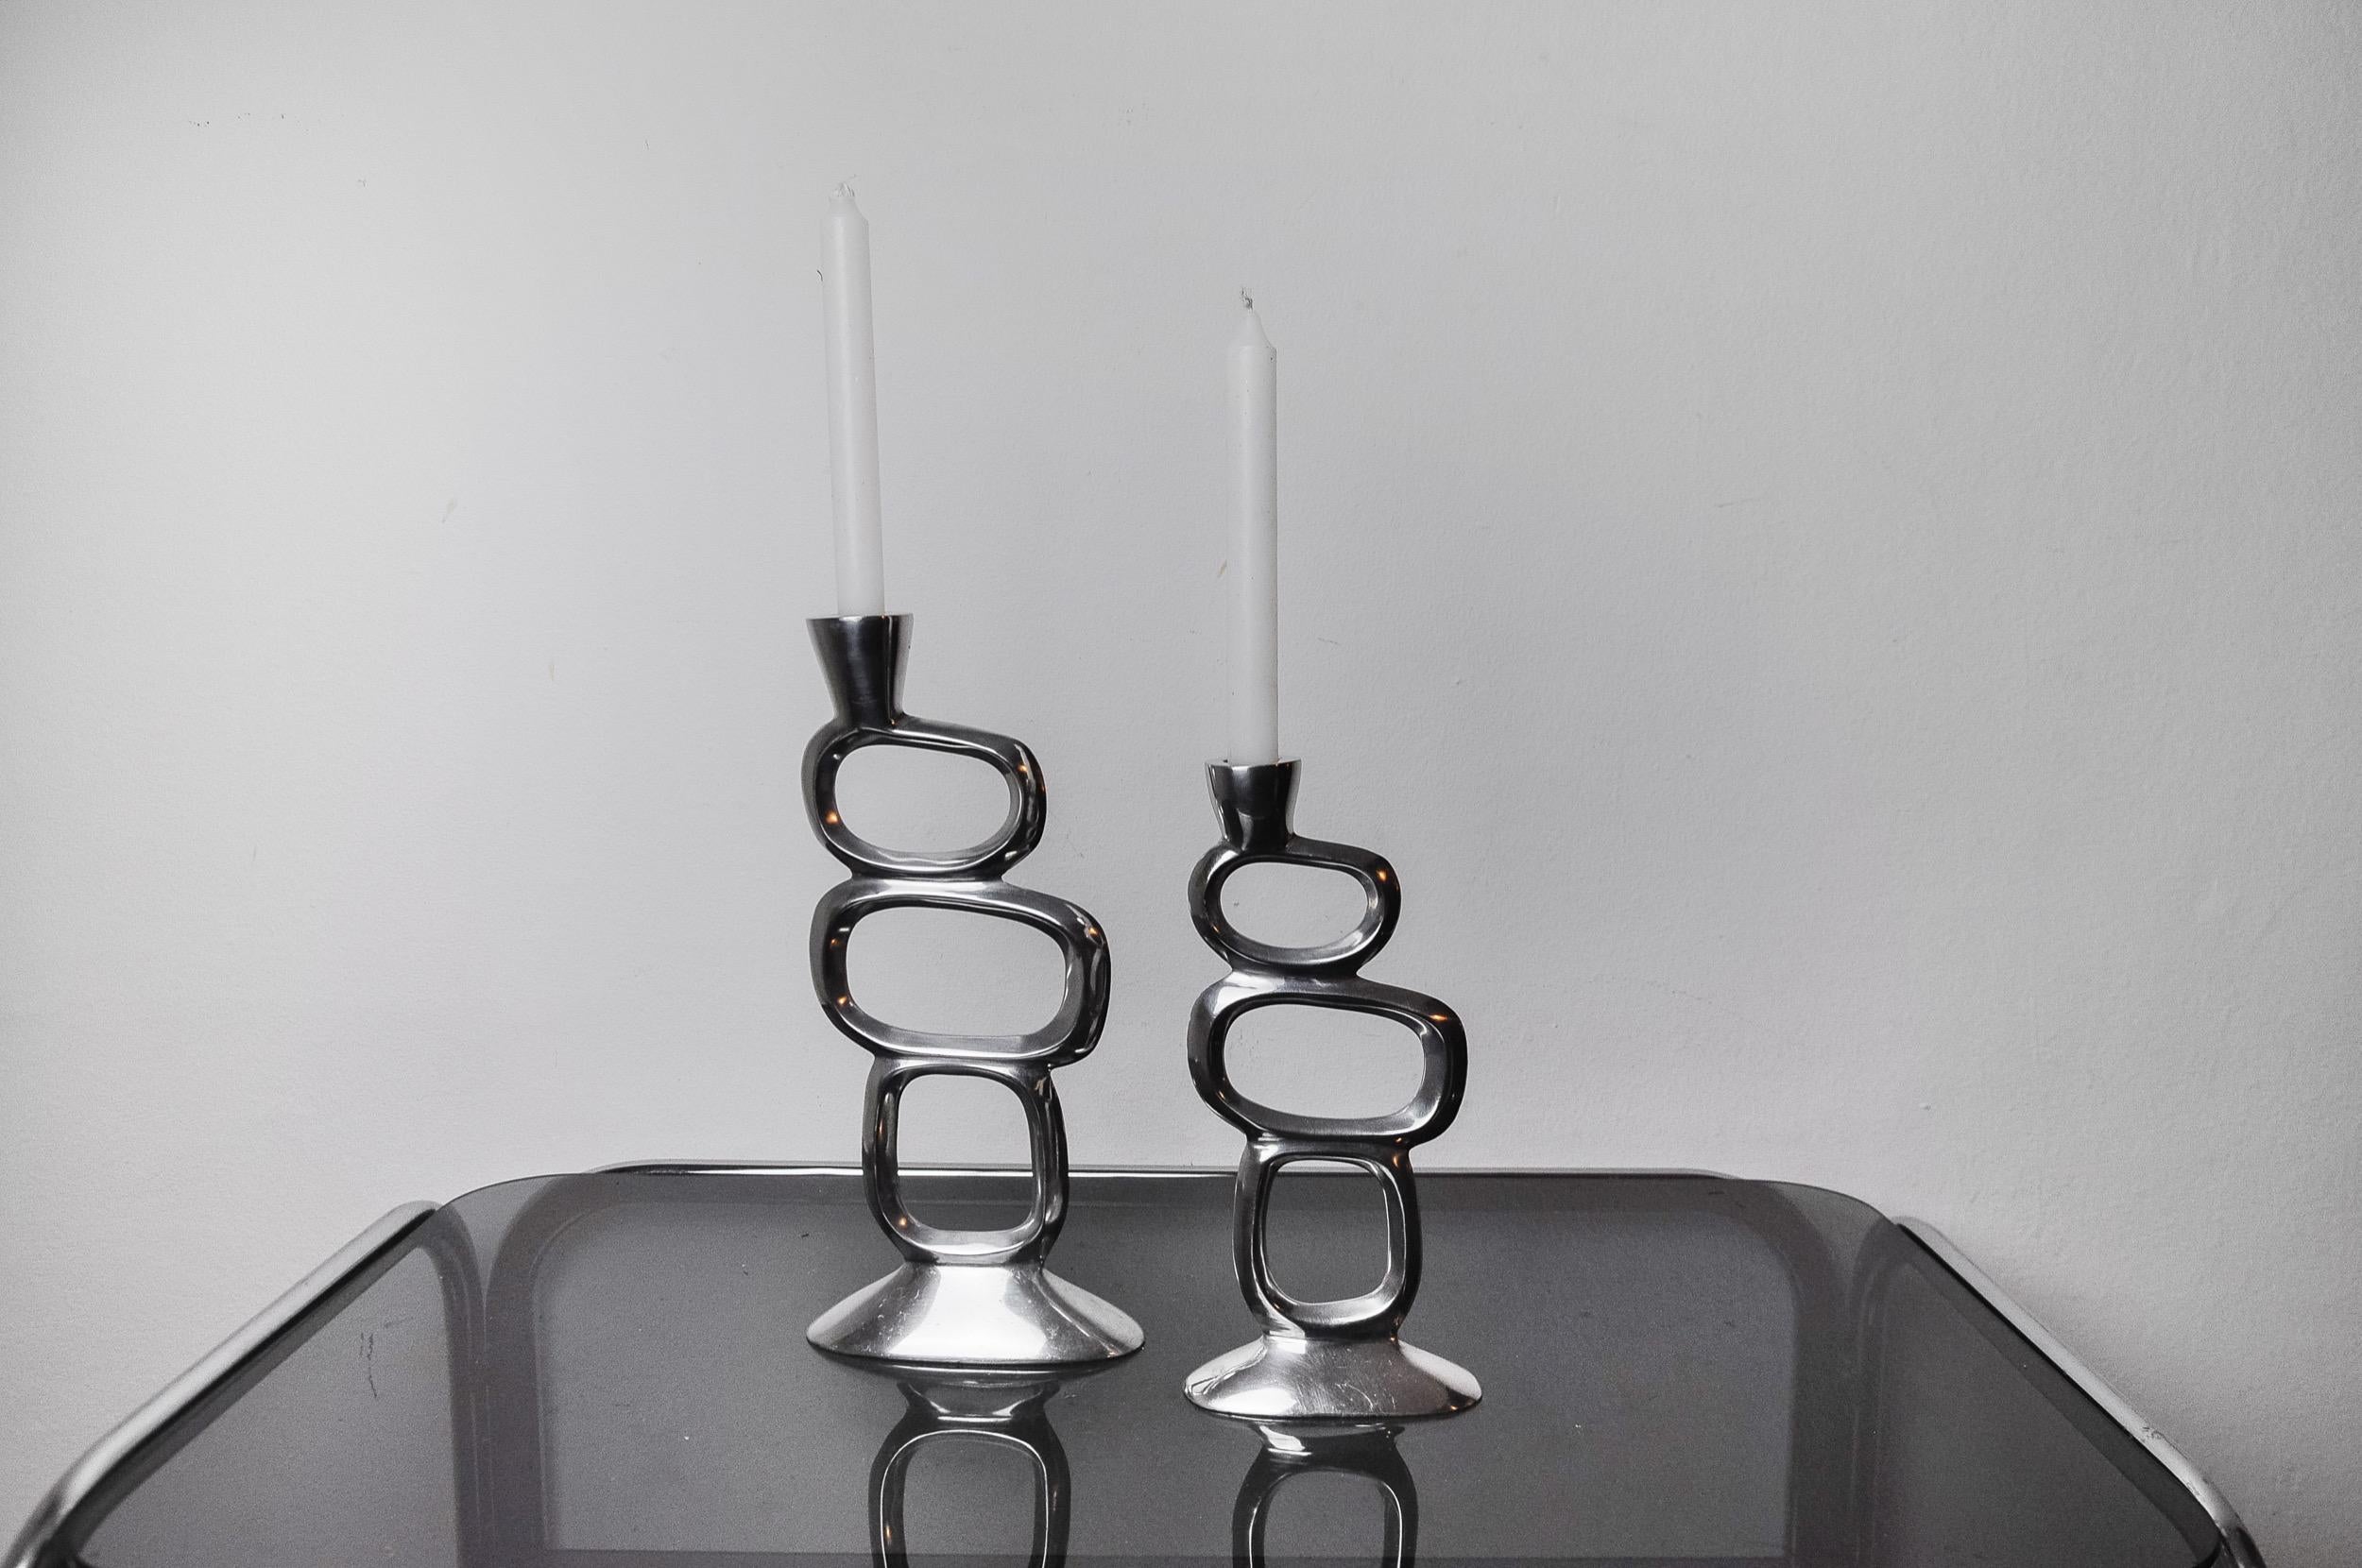 Pair of circle candlesticks designed and produced by Matthew Hilton in England in the 1980s. Set of two aluminum candlesticks in brutalist style. Magnificent decorative objects that will bring a real designer touch to your interior. Very good state